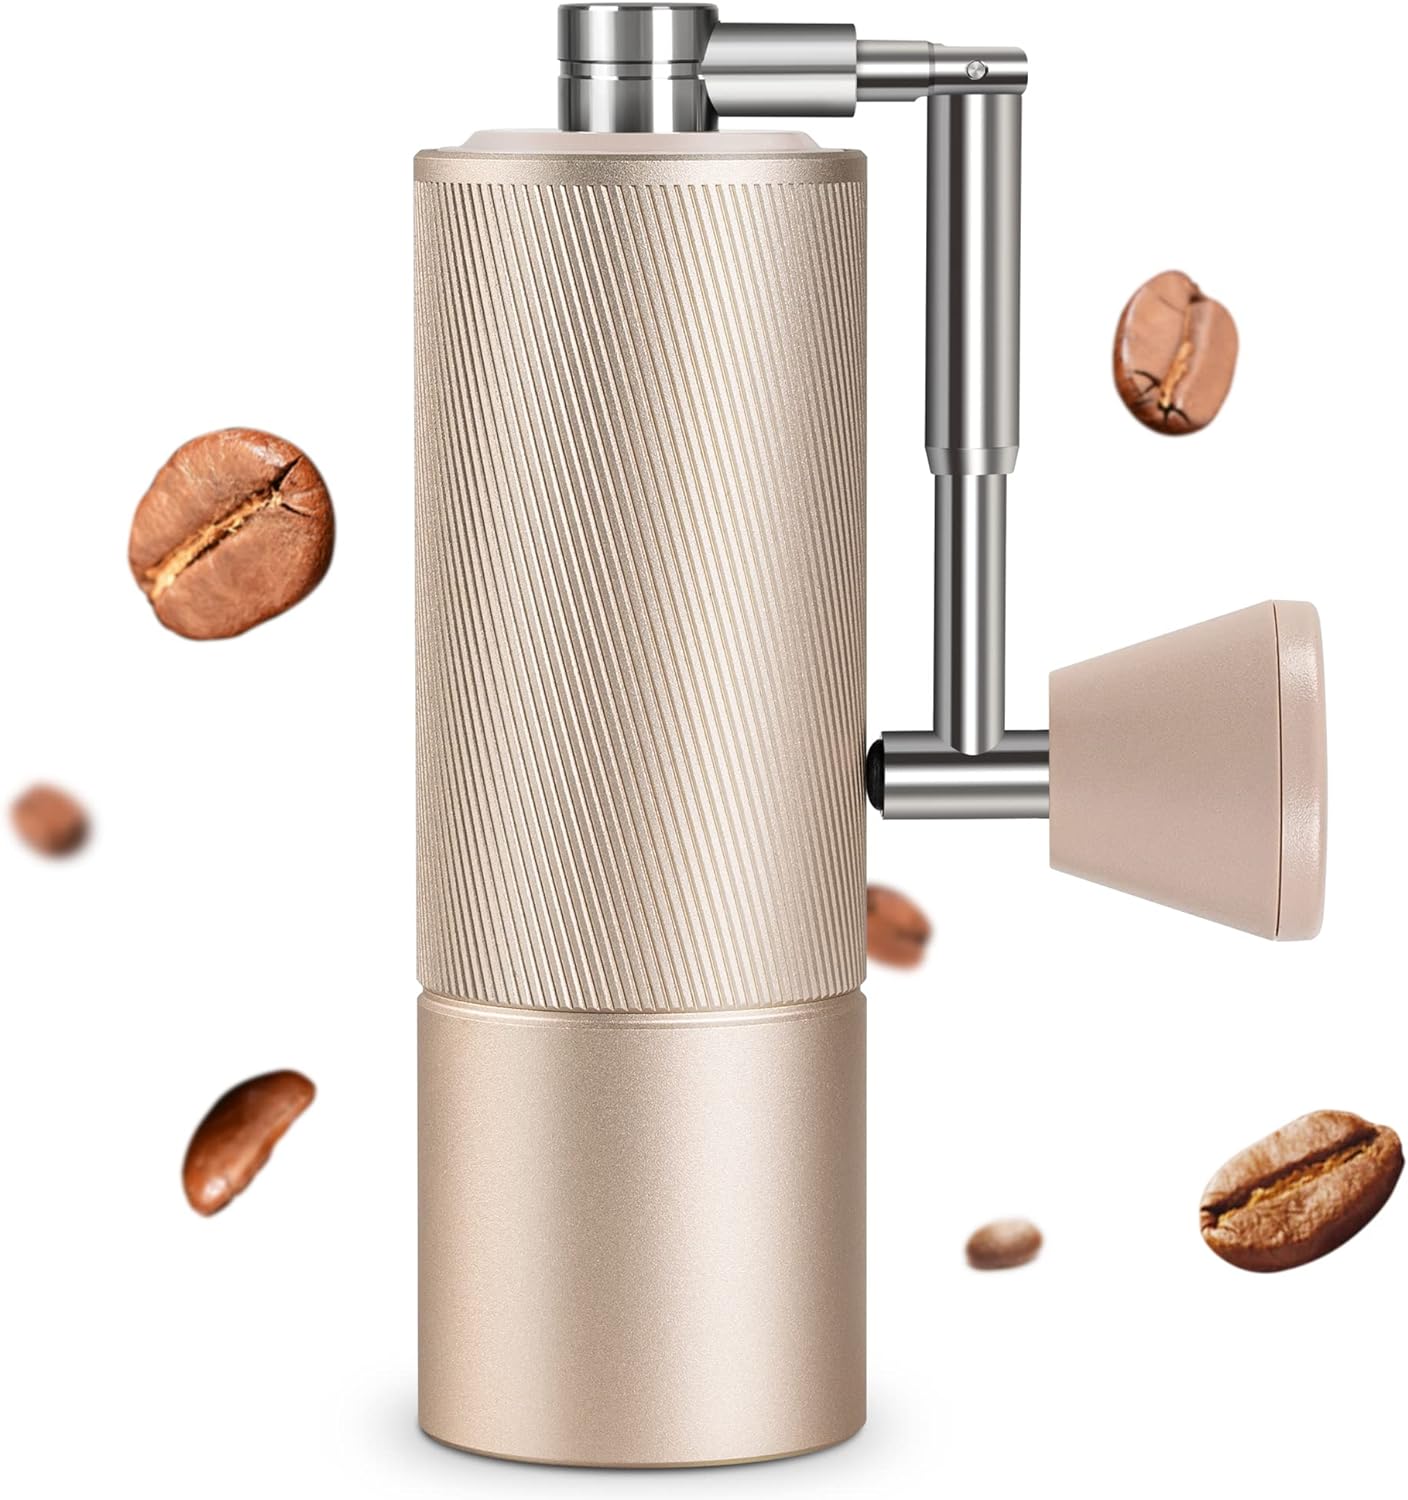 TIMEMORE New – Chestnut C2 Fold Manual Coffee Grinder: A Review